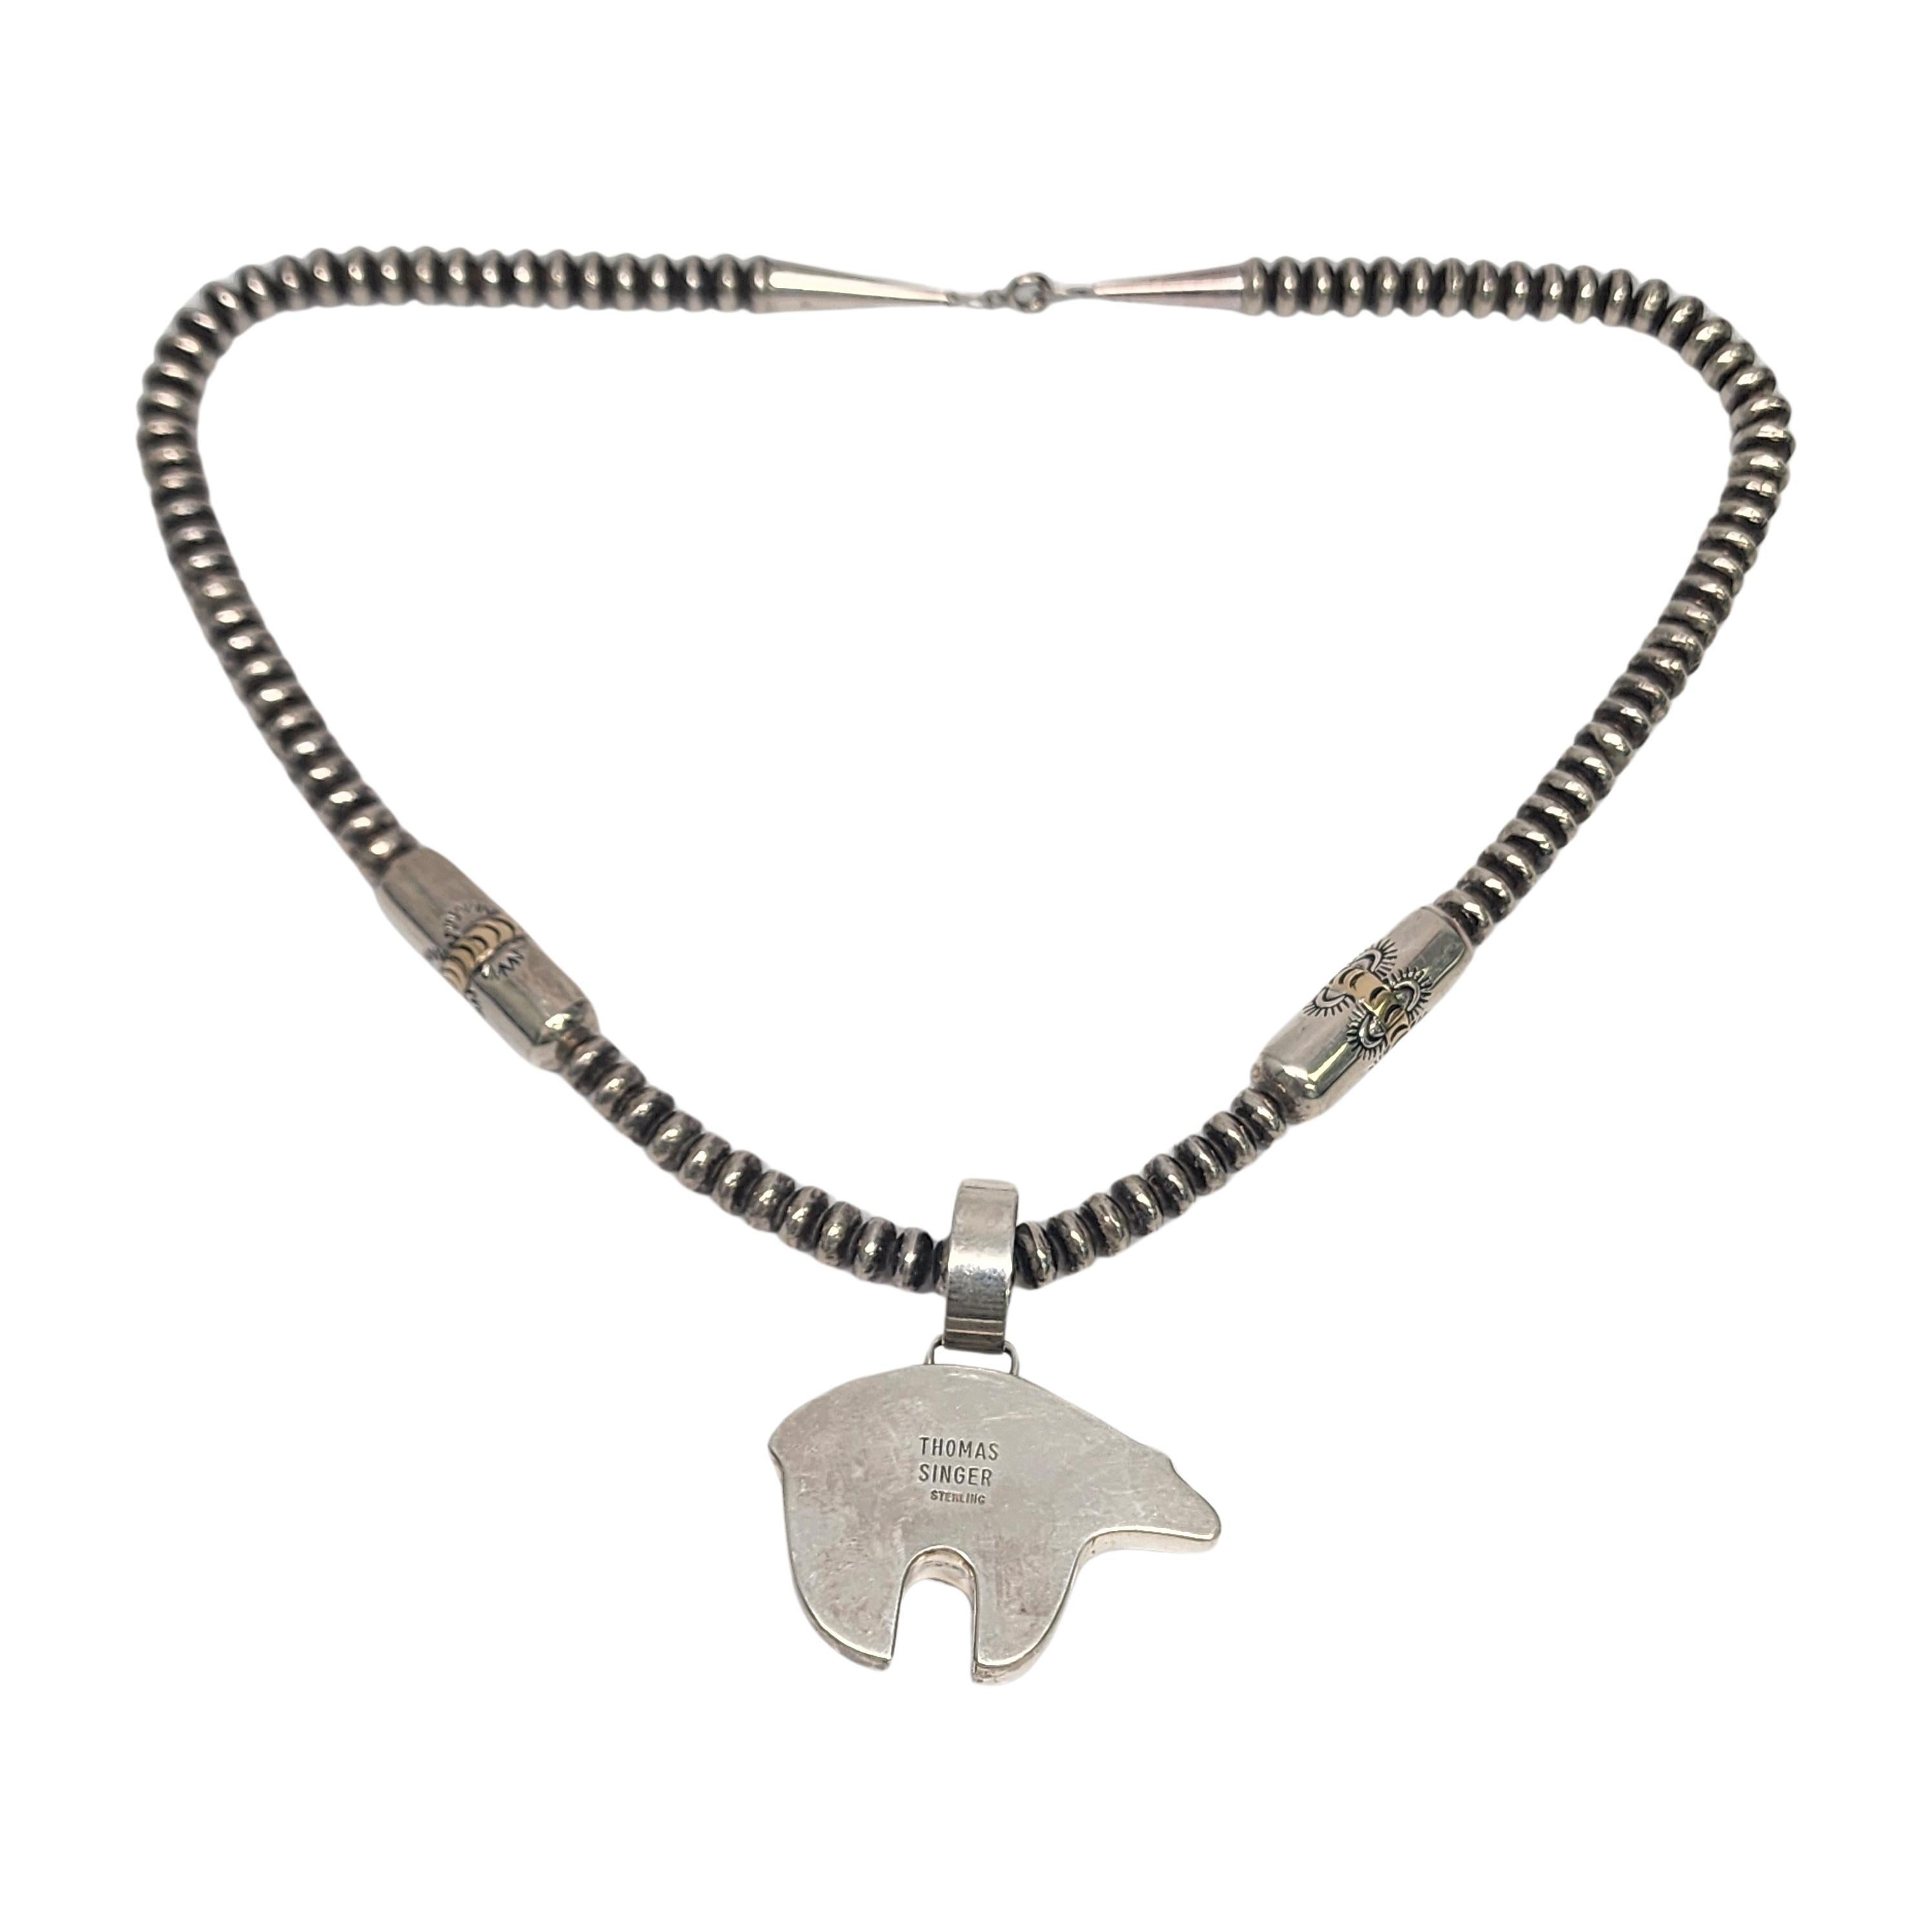 Sterling silver with gold accent saucer and barrel bead necklace by Native American artisan Joe Tortalita, with bear pendant by Native American artisan, Thomas Singer.

Beautiful saucer and barrel bead necklace by Santo Domingo Kewa artisan Joe